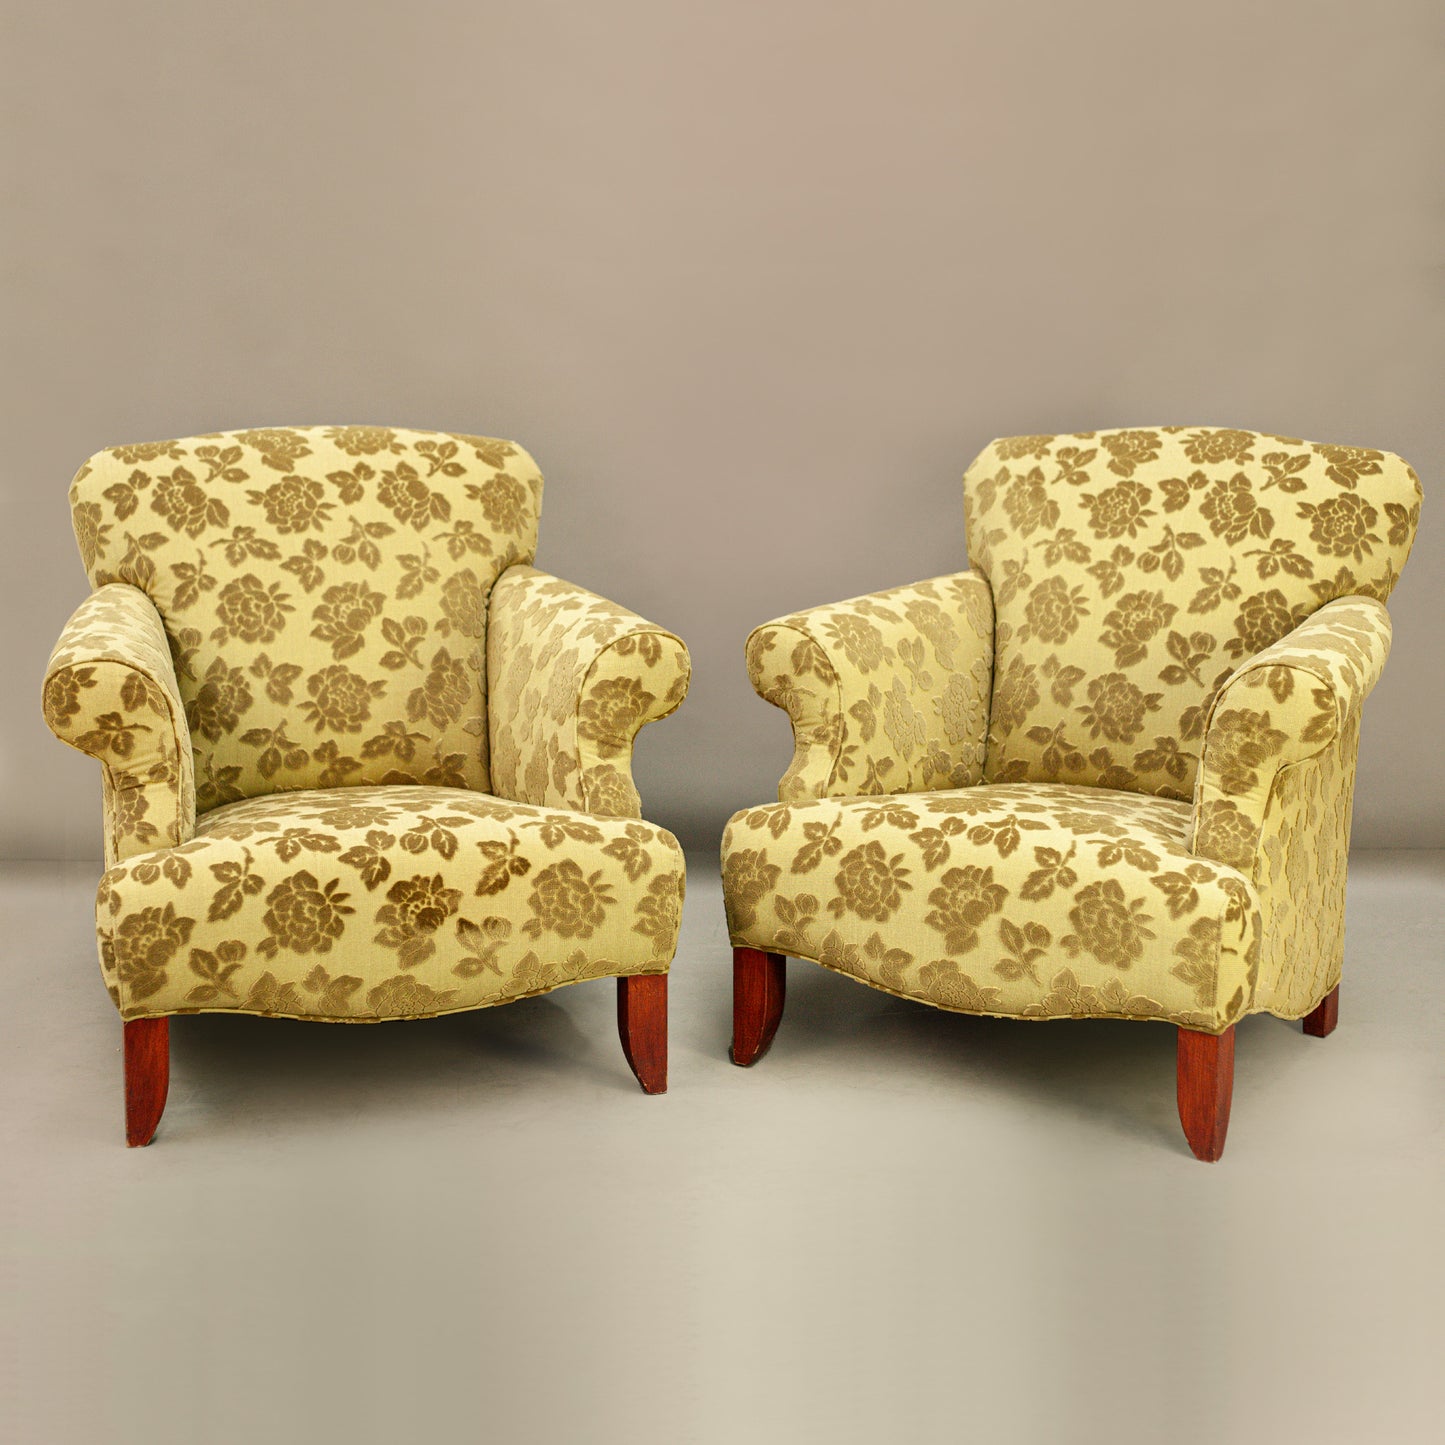 VICTORIAN STYLE ARMCHAIRS